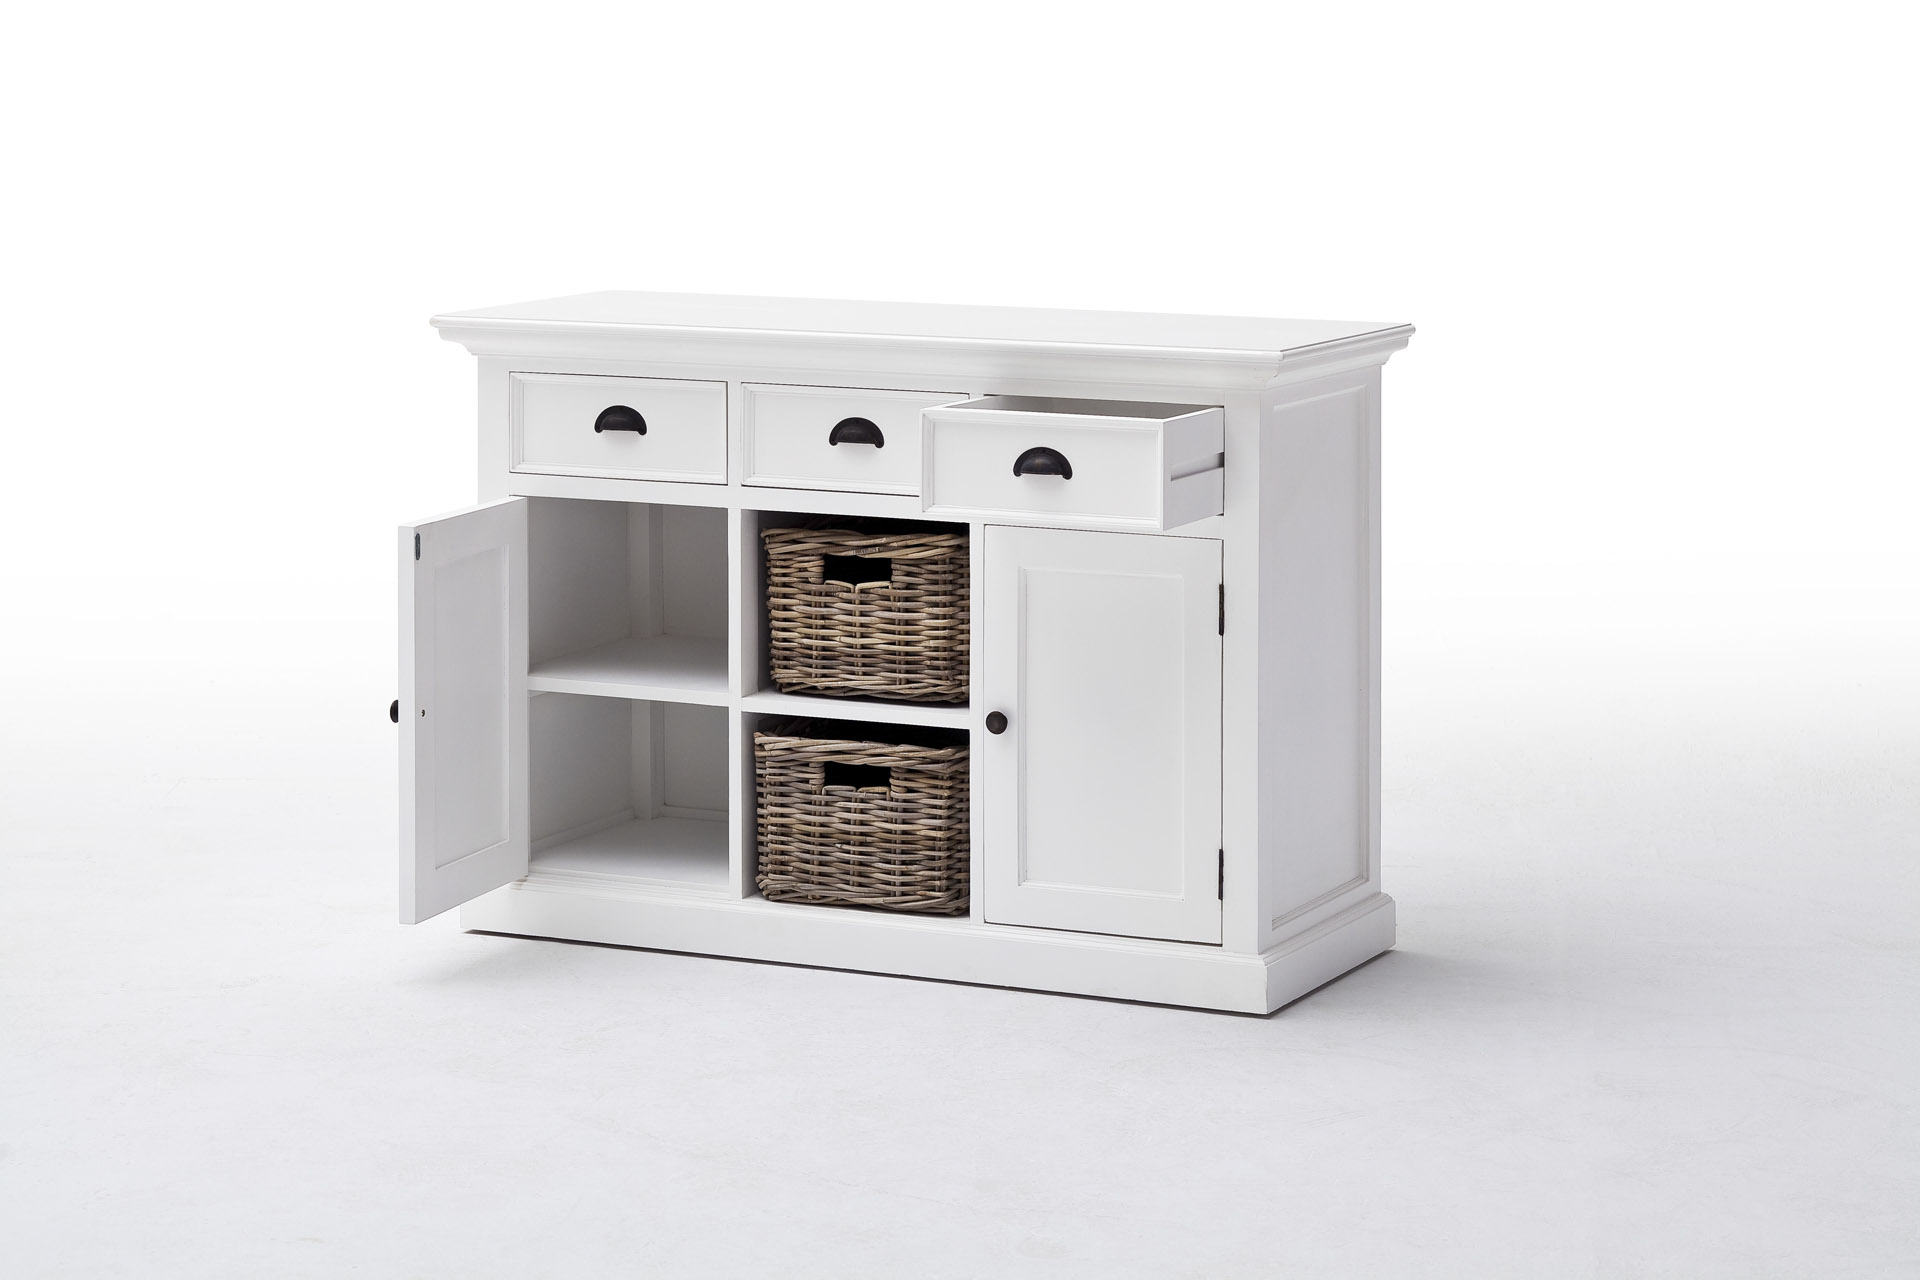 Lage kast wit hardhout collectie van Marcottestyle